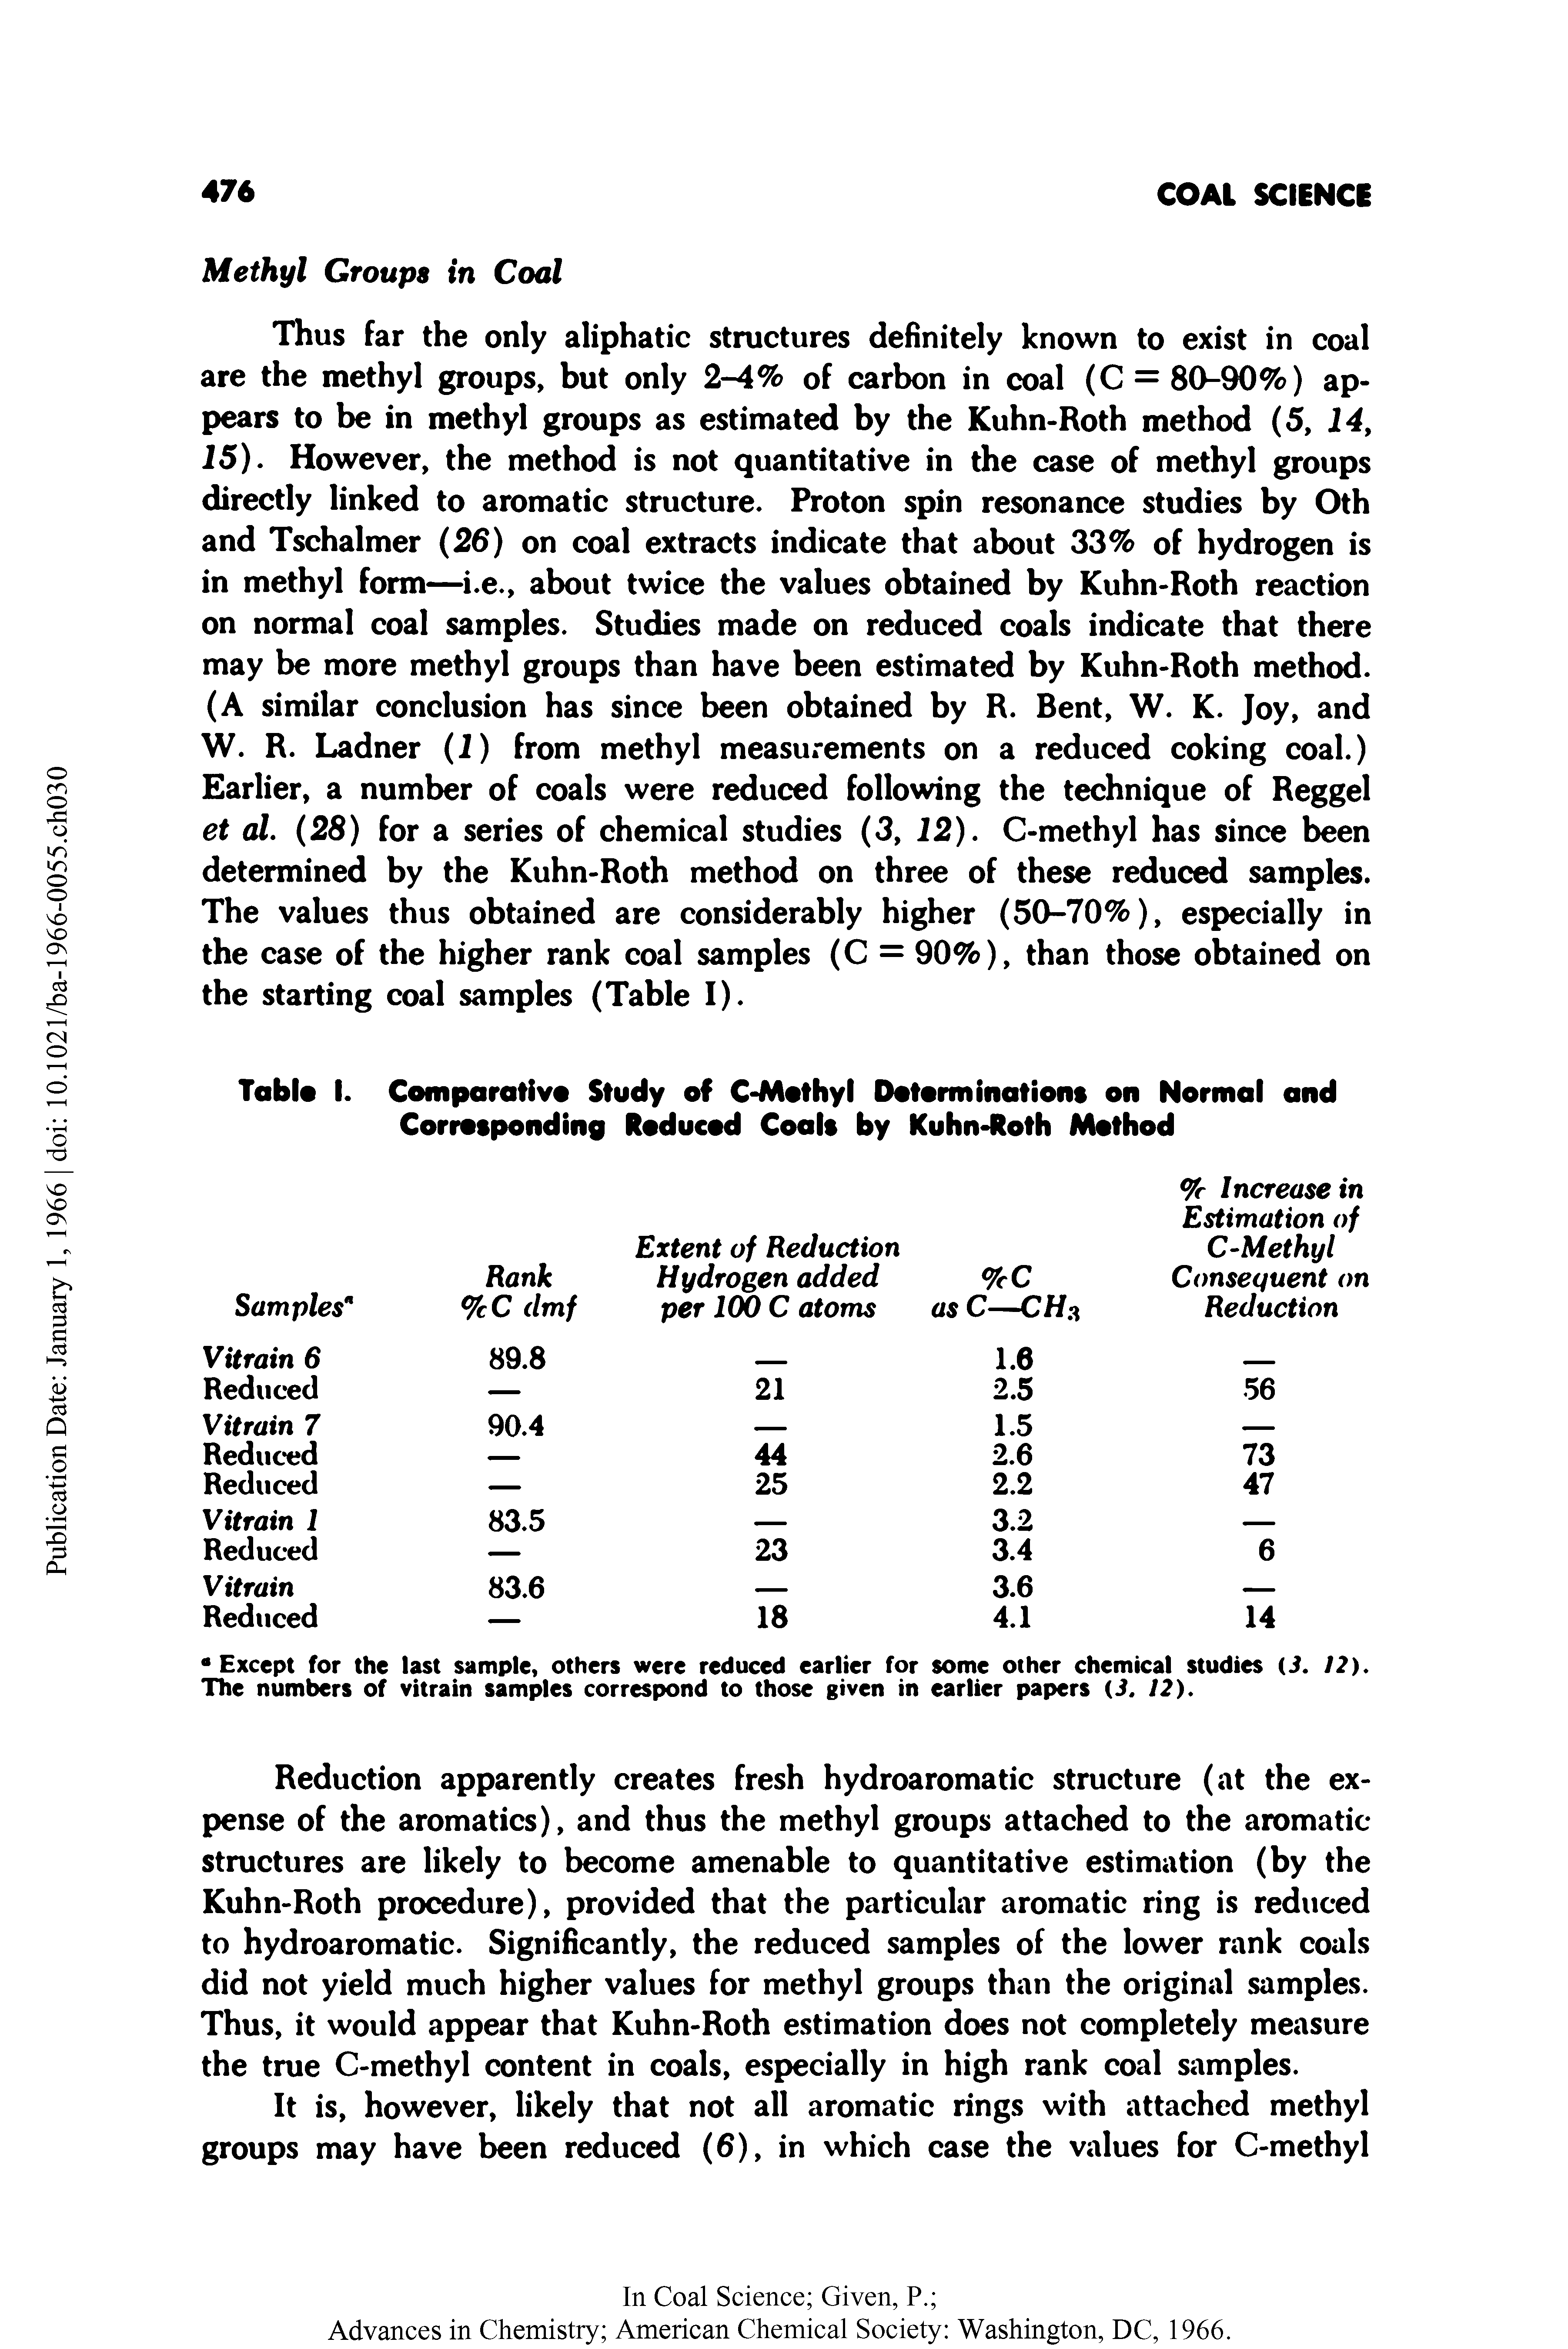 Table I. Comparative Study of C-Methyl Determinations on Normal and Corresponding Reduced Coals by Kuhn-Roth Method...